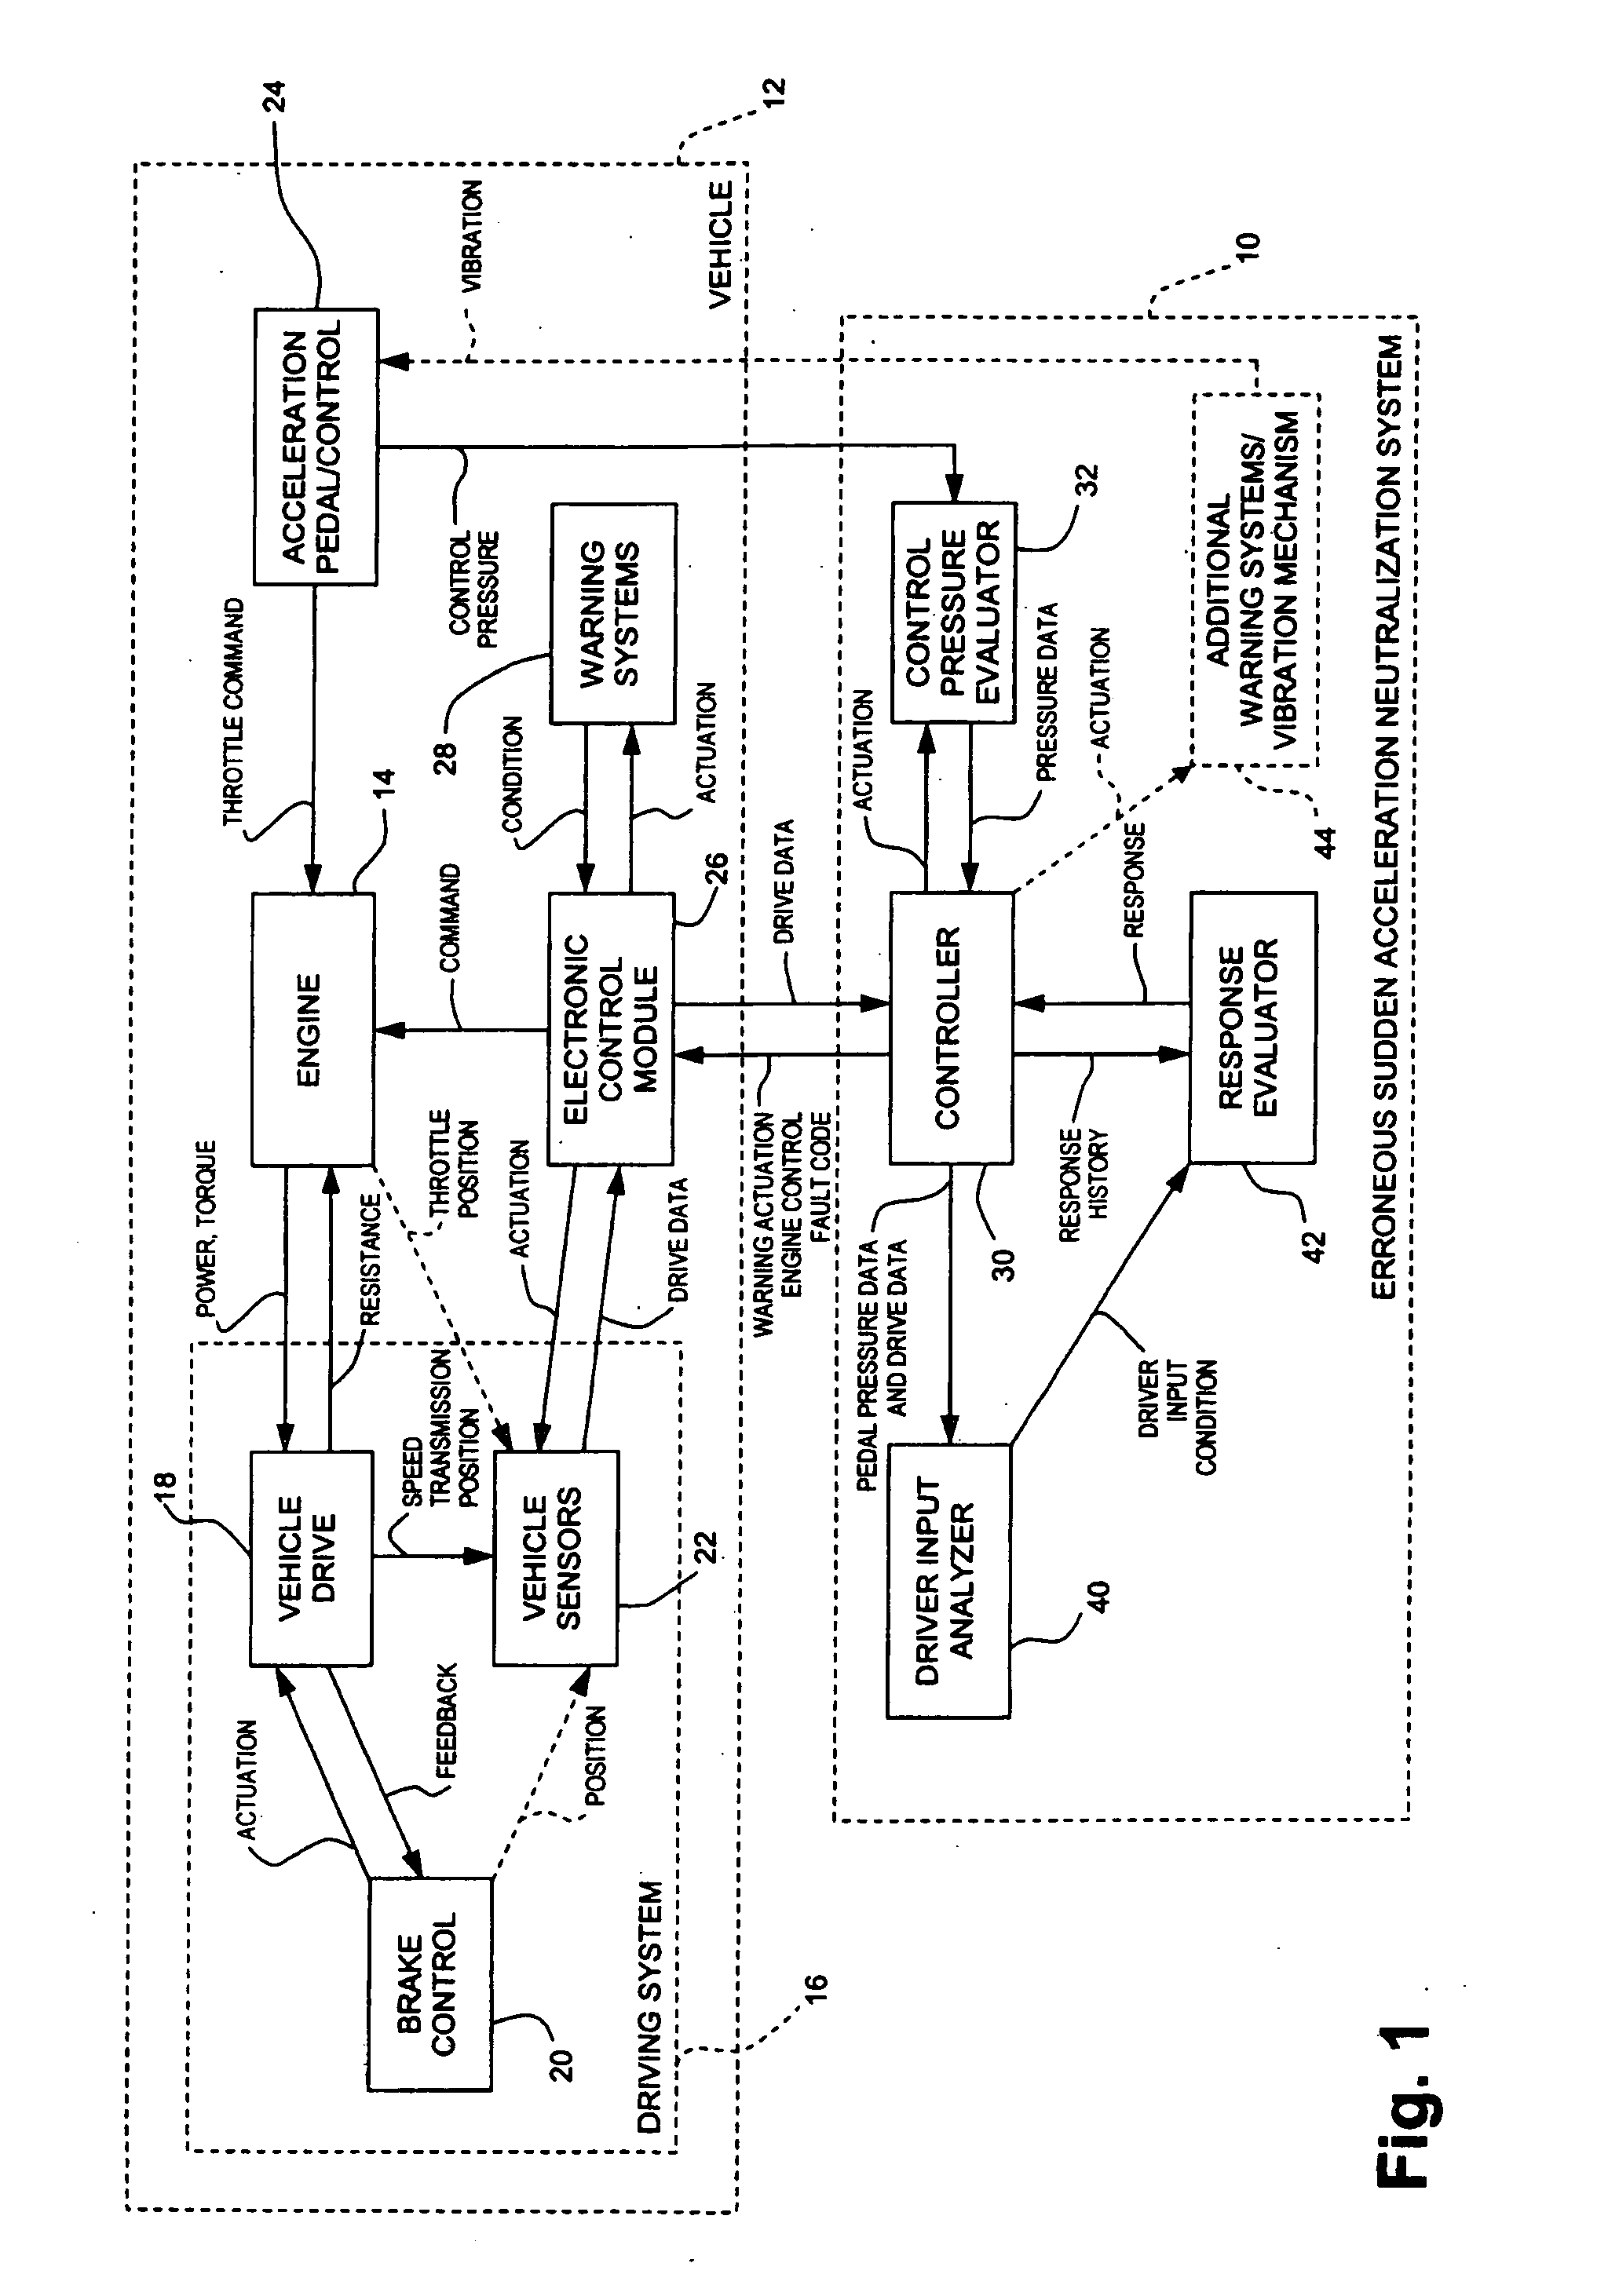 Erroneous sudden acceleration neutralization system and method